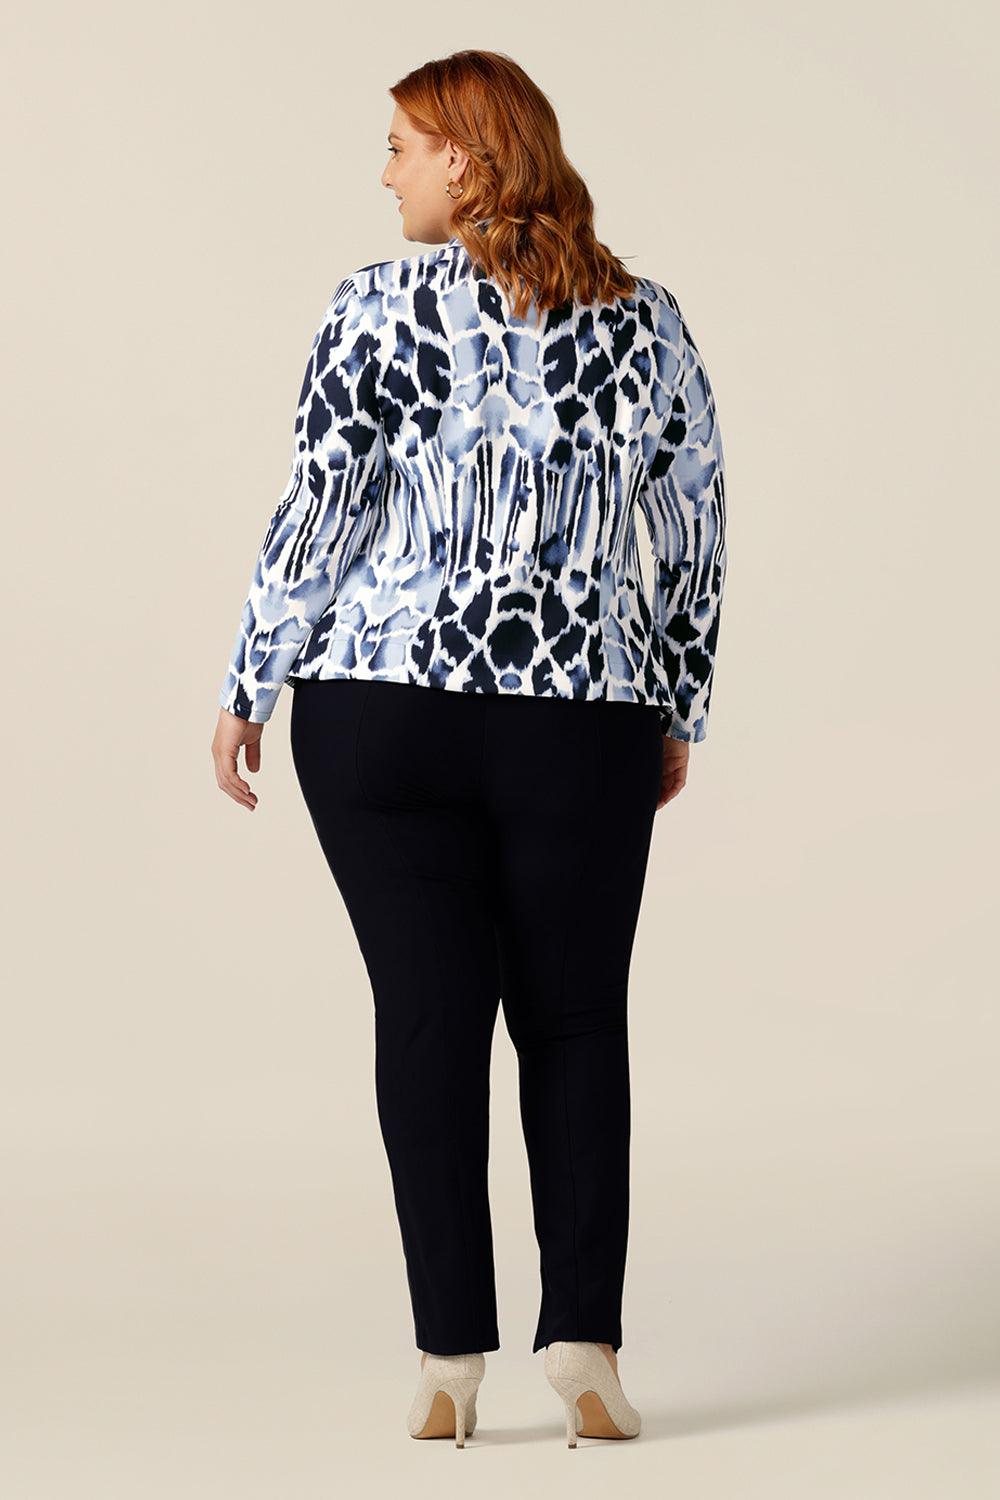 A size 18, plus size woman wears a comfortable work jacket in navy and white. Open-fronted, this soft tailored jacket has a tie belt and long sleeves. Worn with slim-leg navy pants, this jacket is a good workwear jacket for corporate and smart-casual business wear.